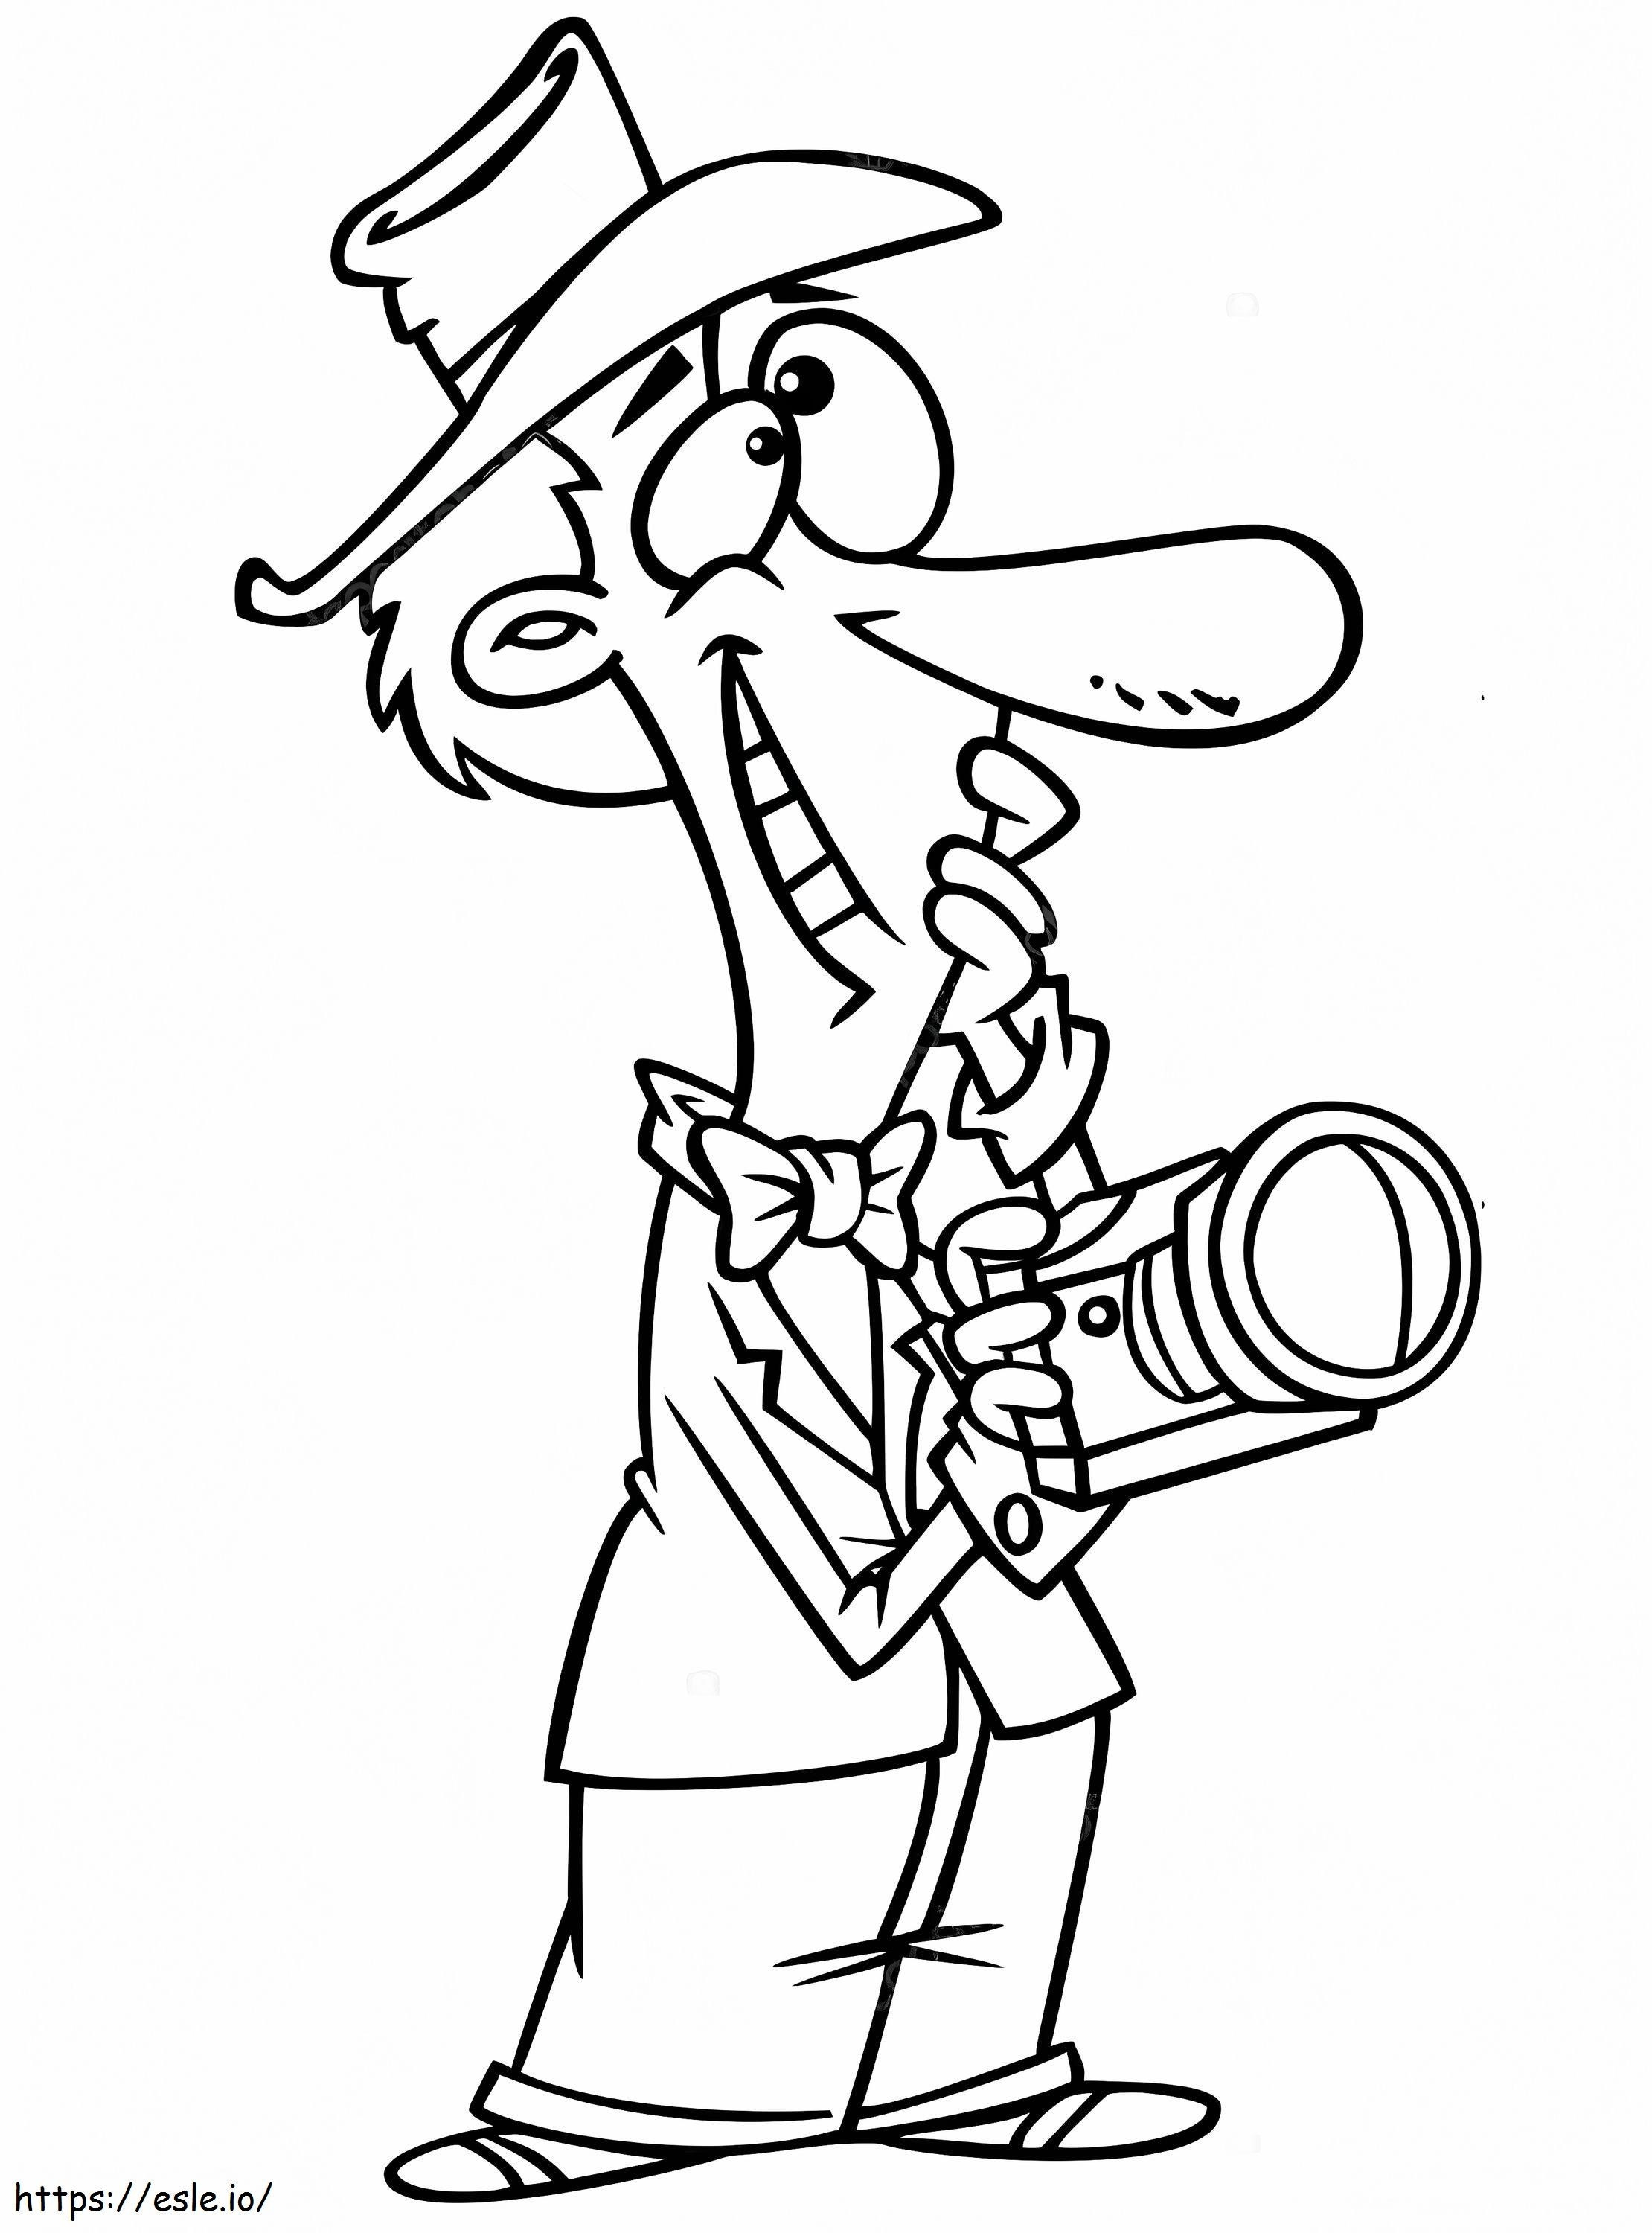 Professional Photographer coloring page